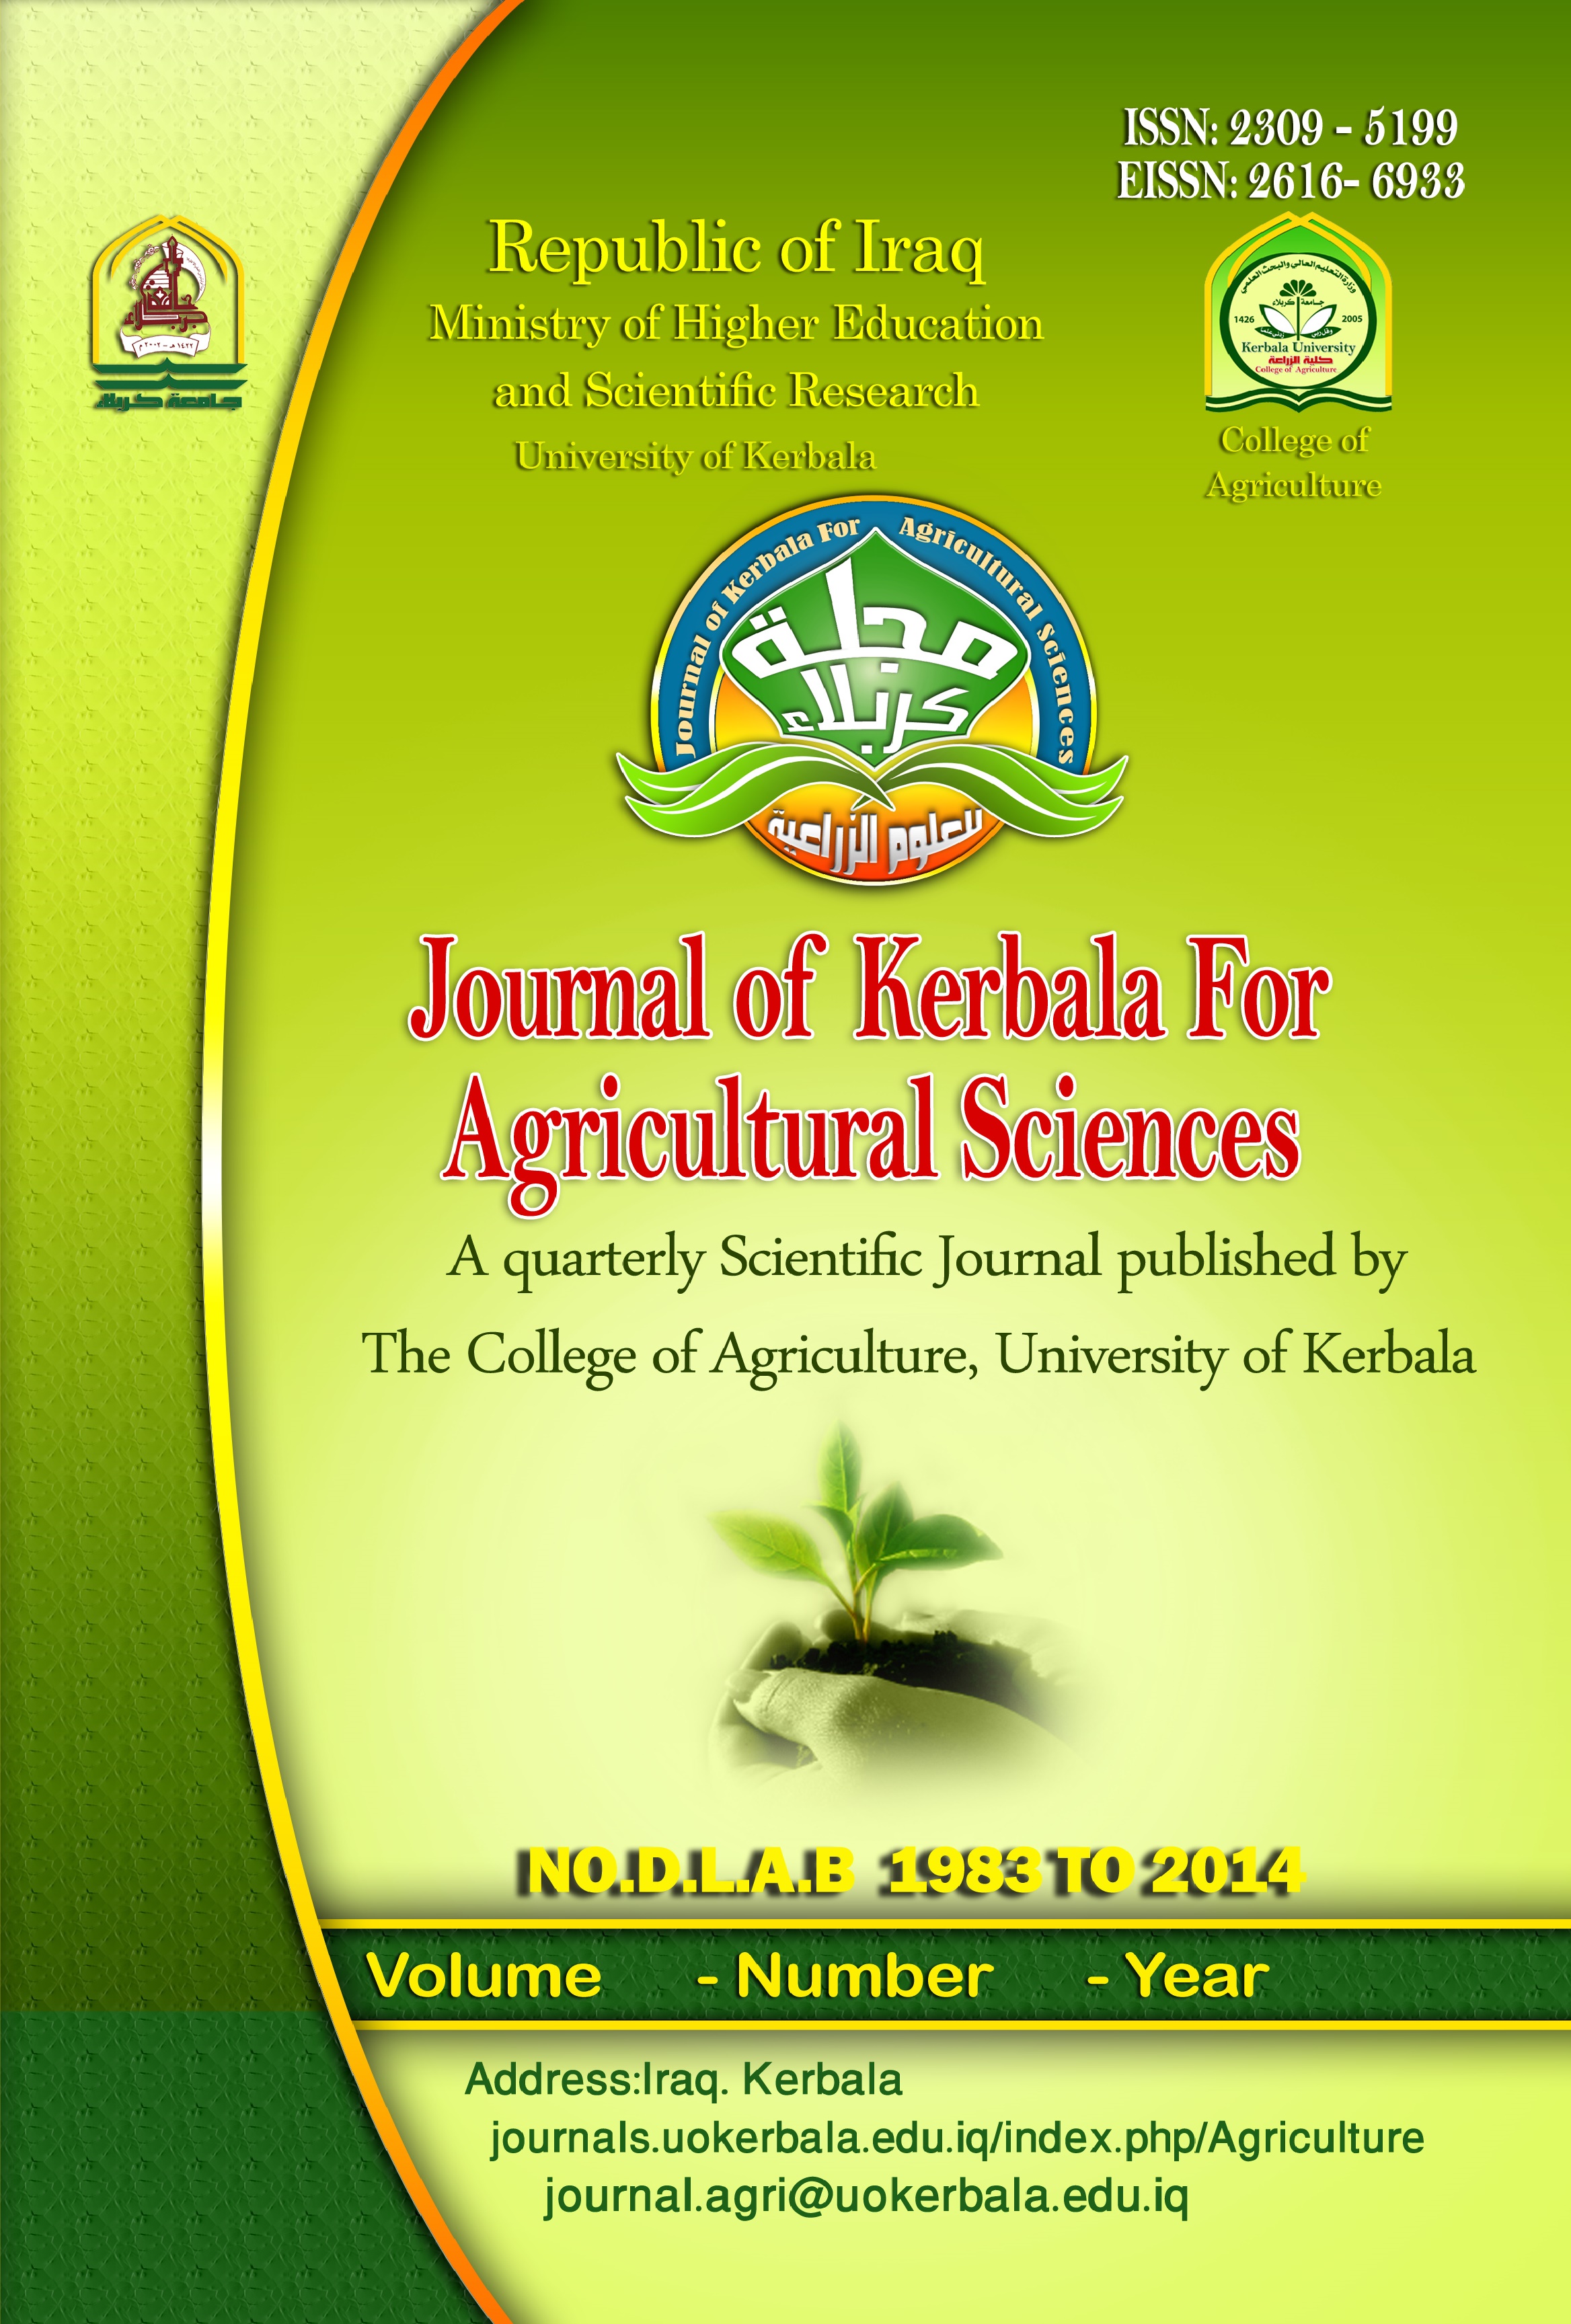 					View Vol. 6 No. 2 (2019): Journal of Kerbala for Agricultural Sciences  Vol.(6), Issue (2) (2019)
				